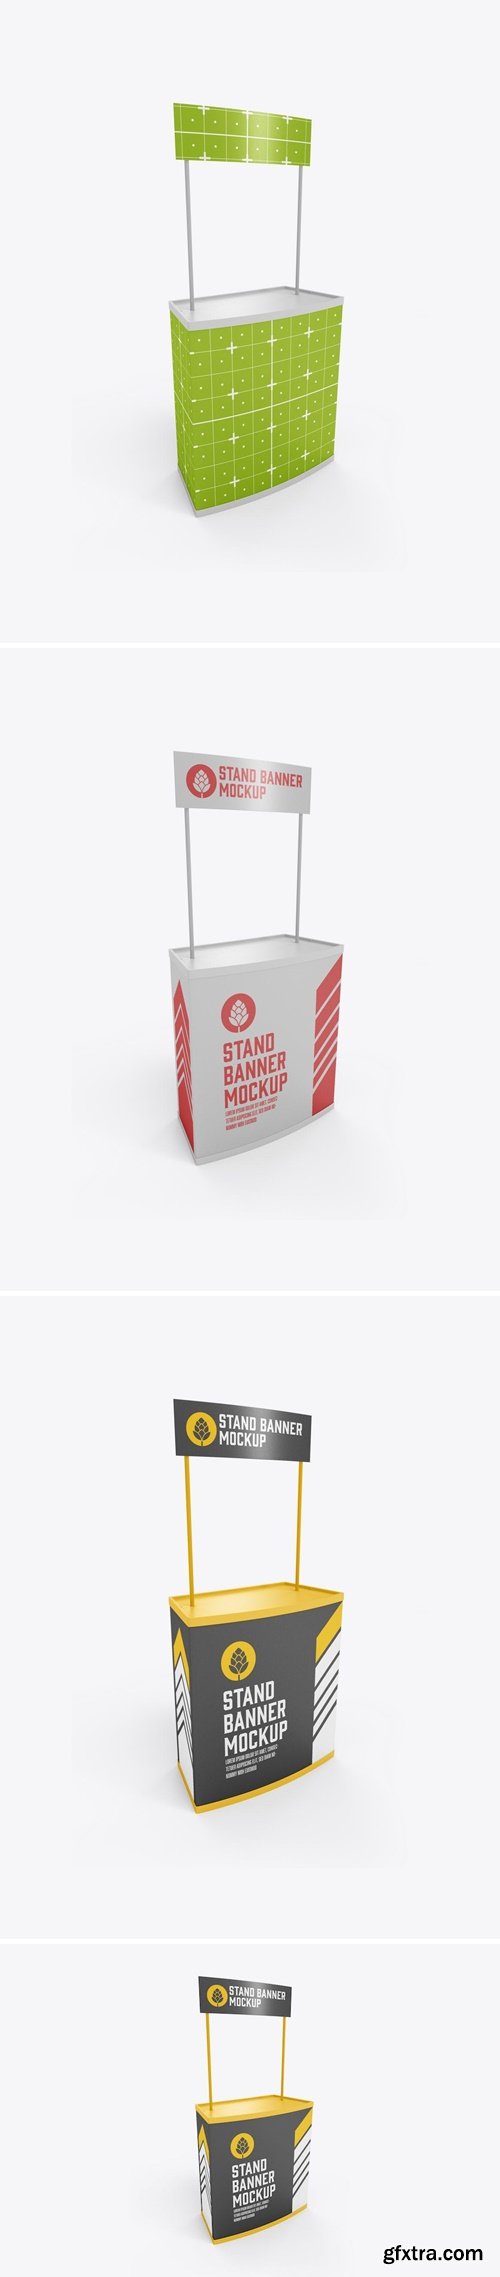 Promo Stand Banner Mockup GS3EH83